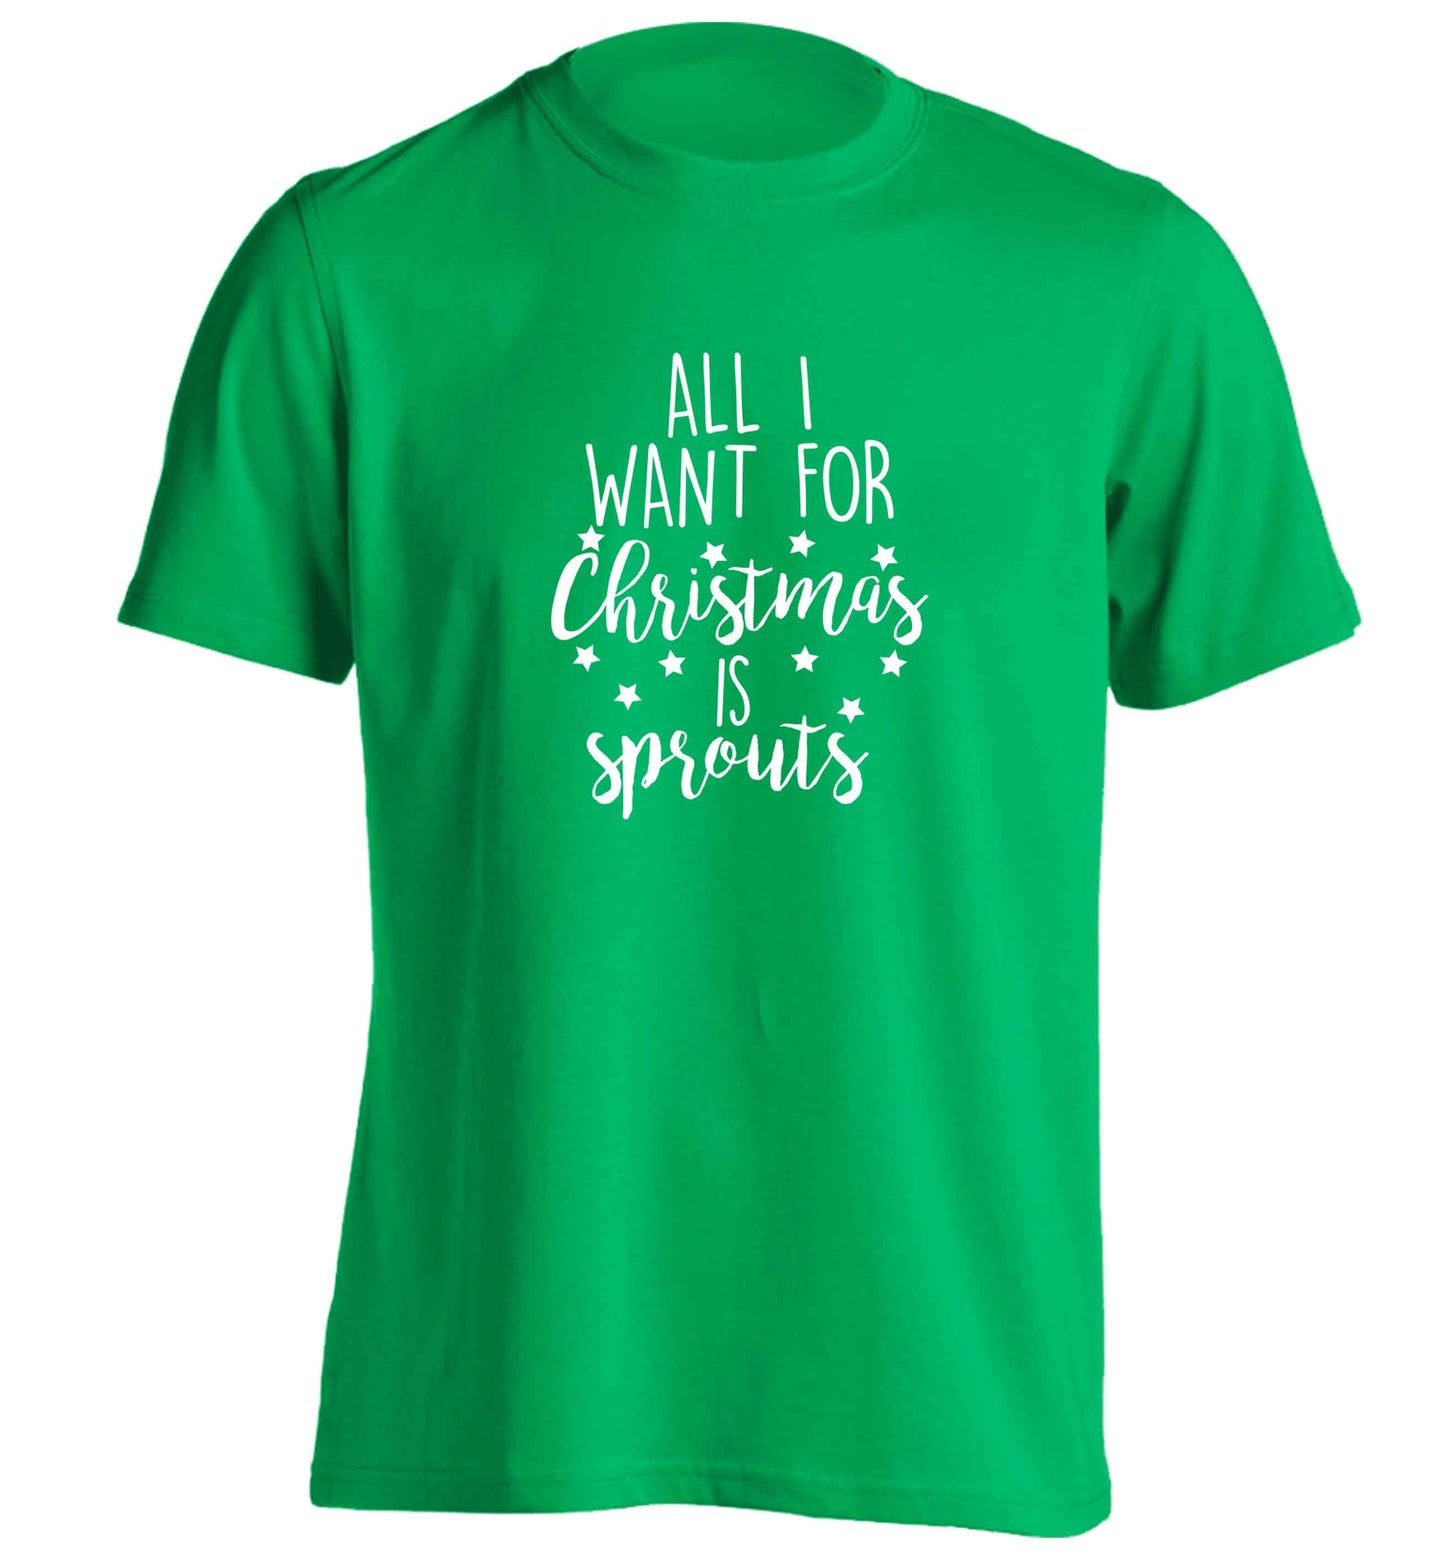 All I want for Christmas is sprouts adults unisex green Tshirt 2XL